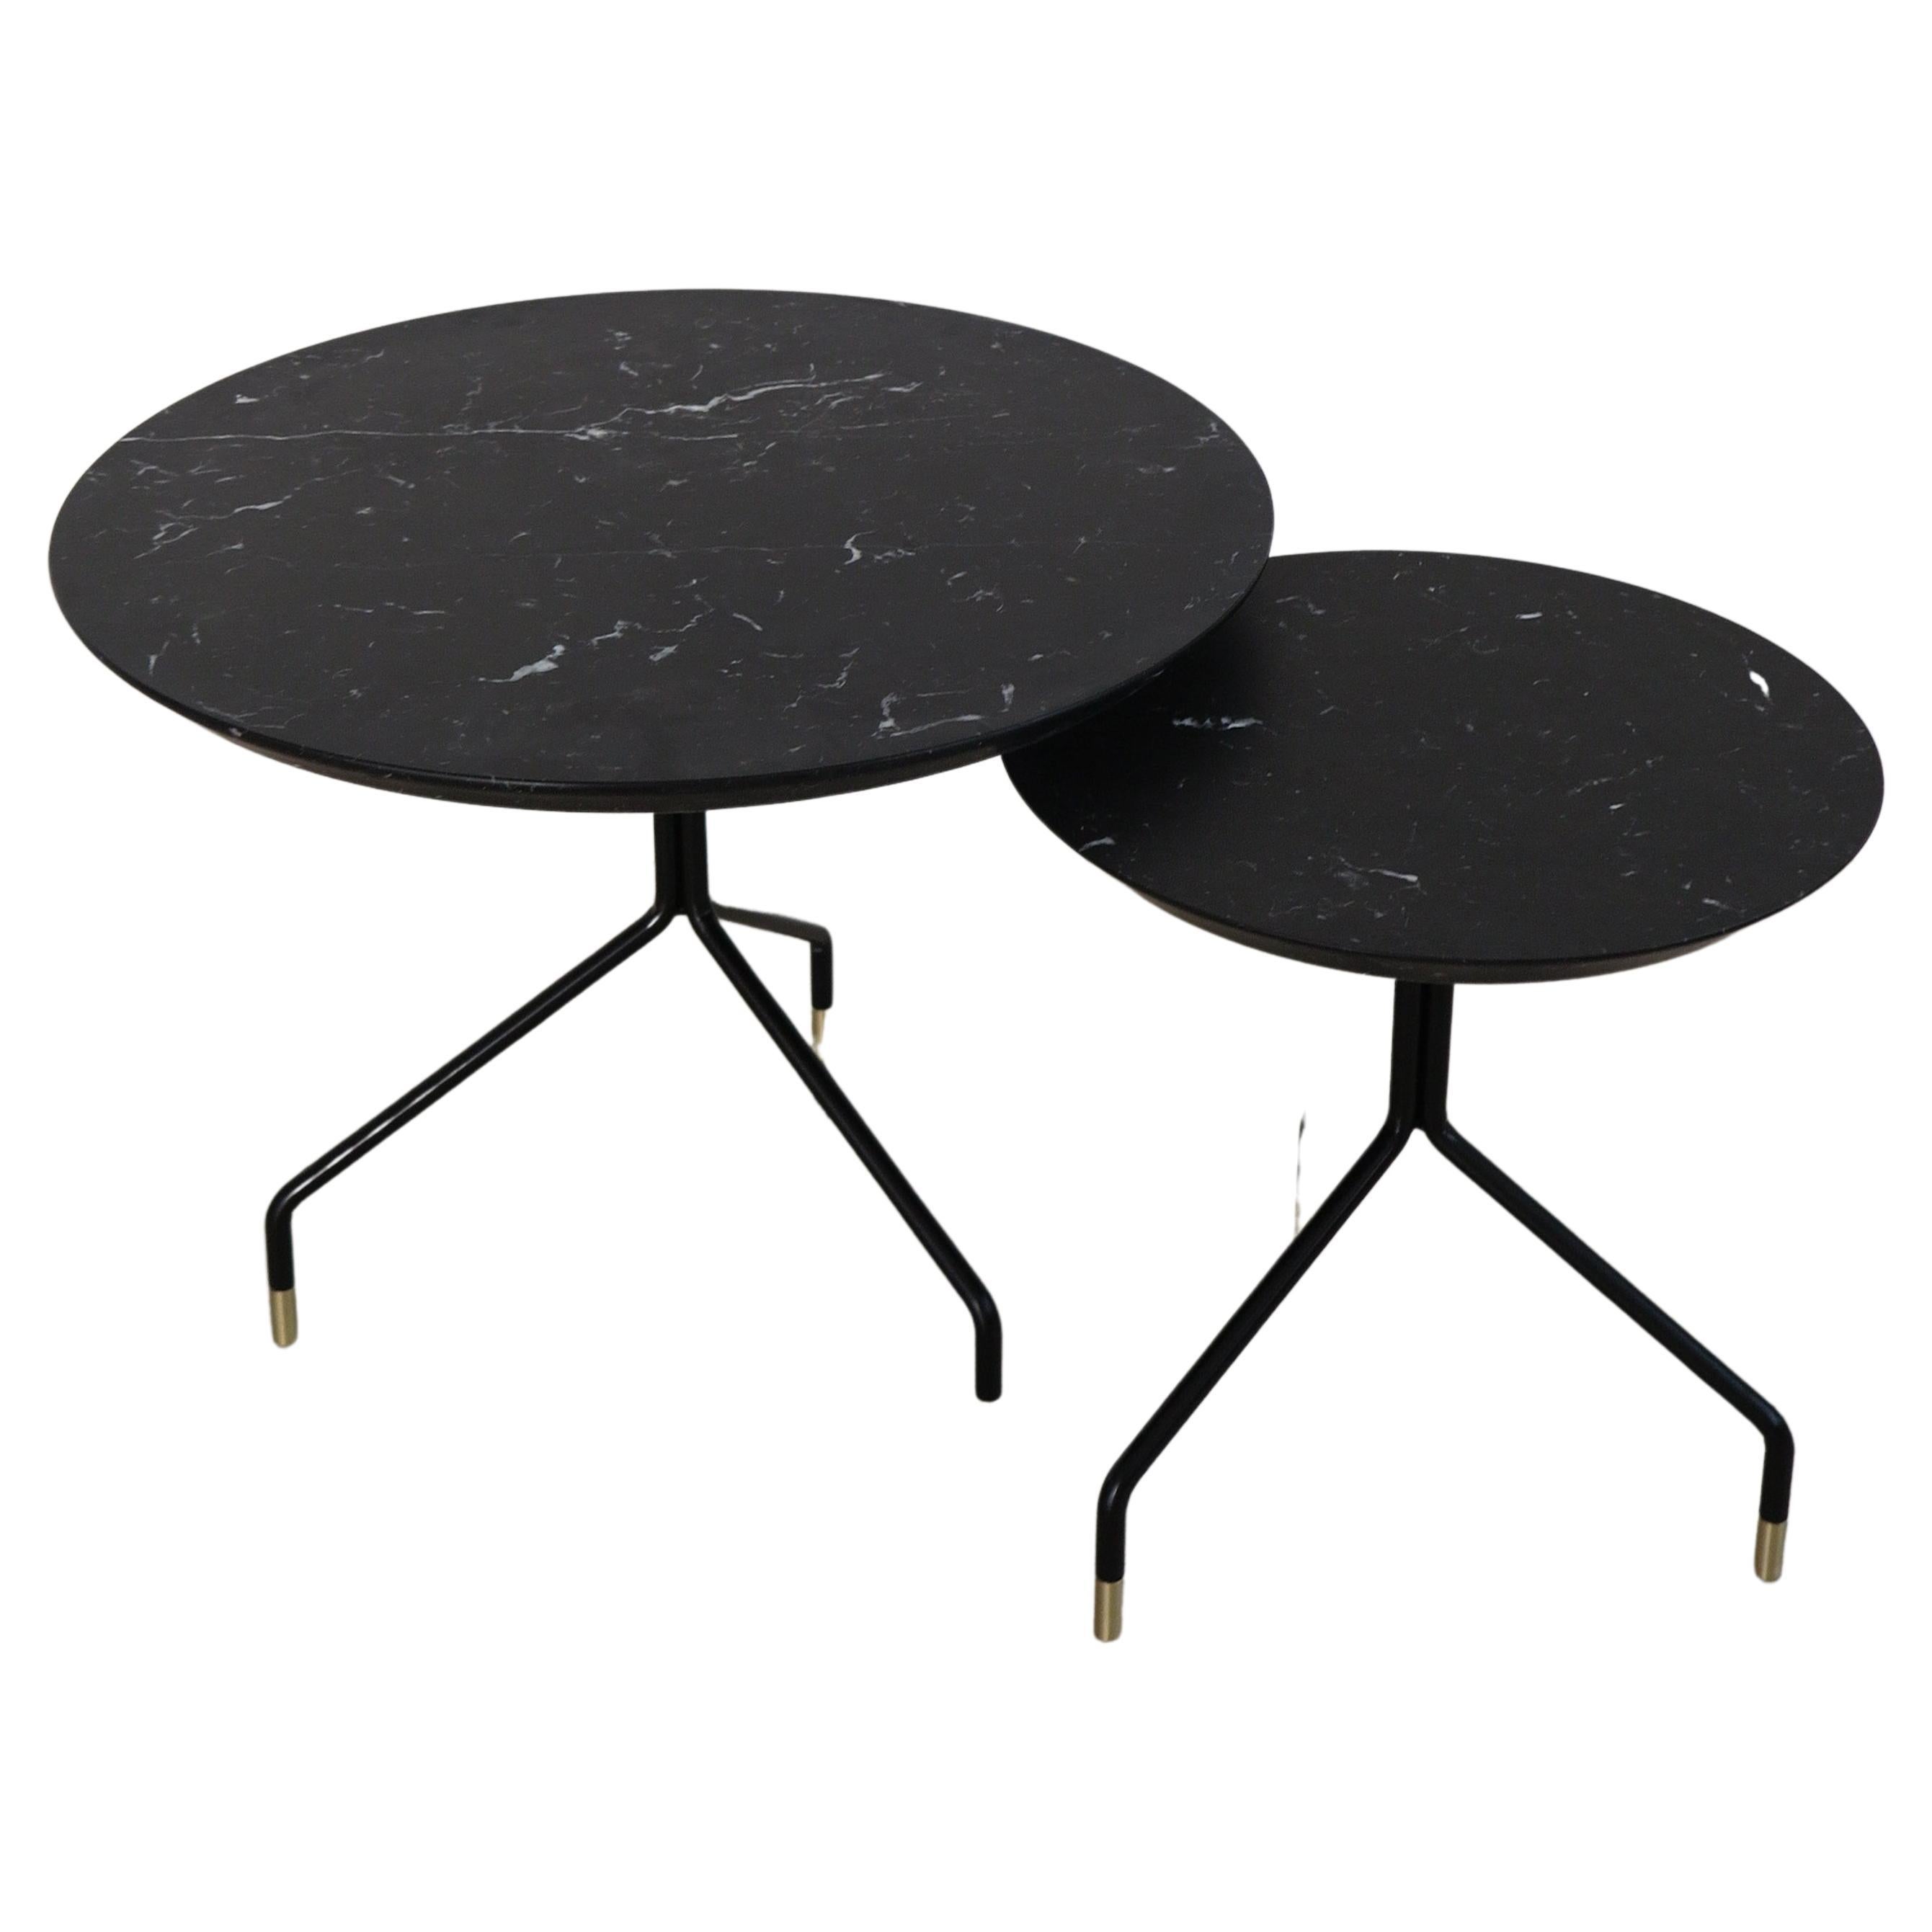 Italian Contemporary Black Marble Coffee Tables Set New Design Capperidicasa For Sale